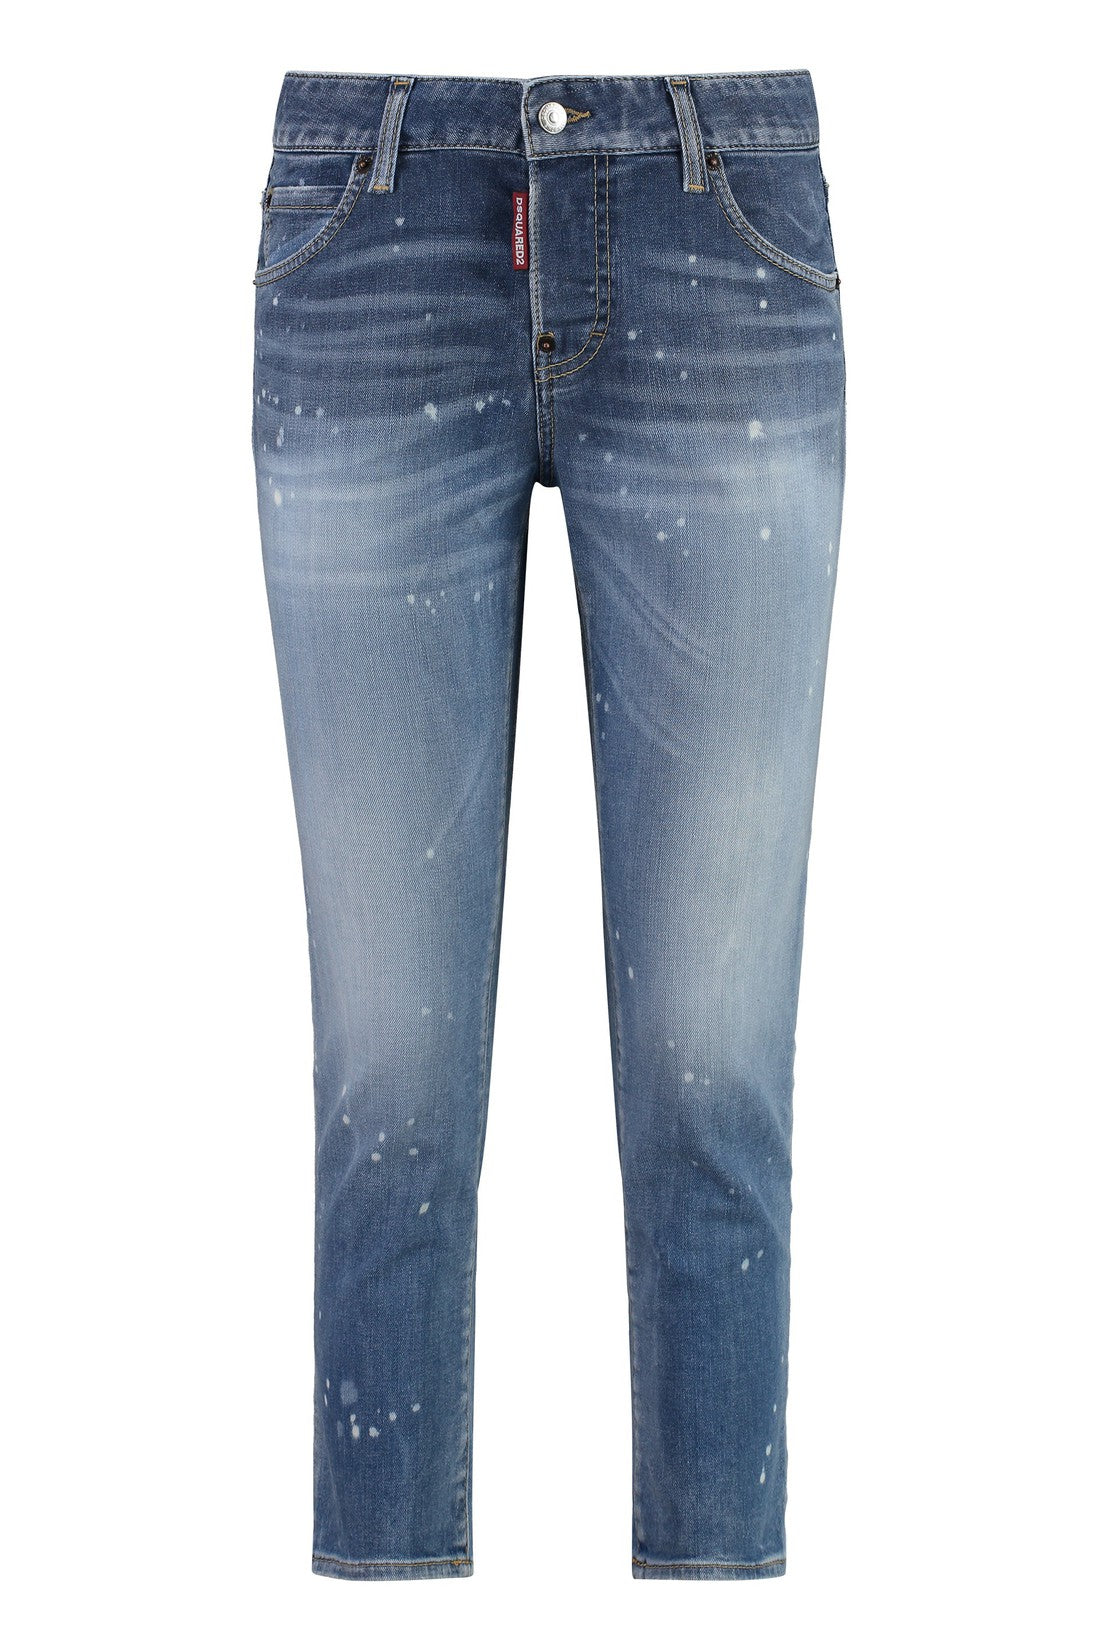 Dsquared2-OUTLET-SALE-'Cool girl' cropped jeans-ARCHIVIST